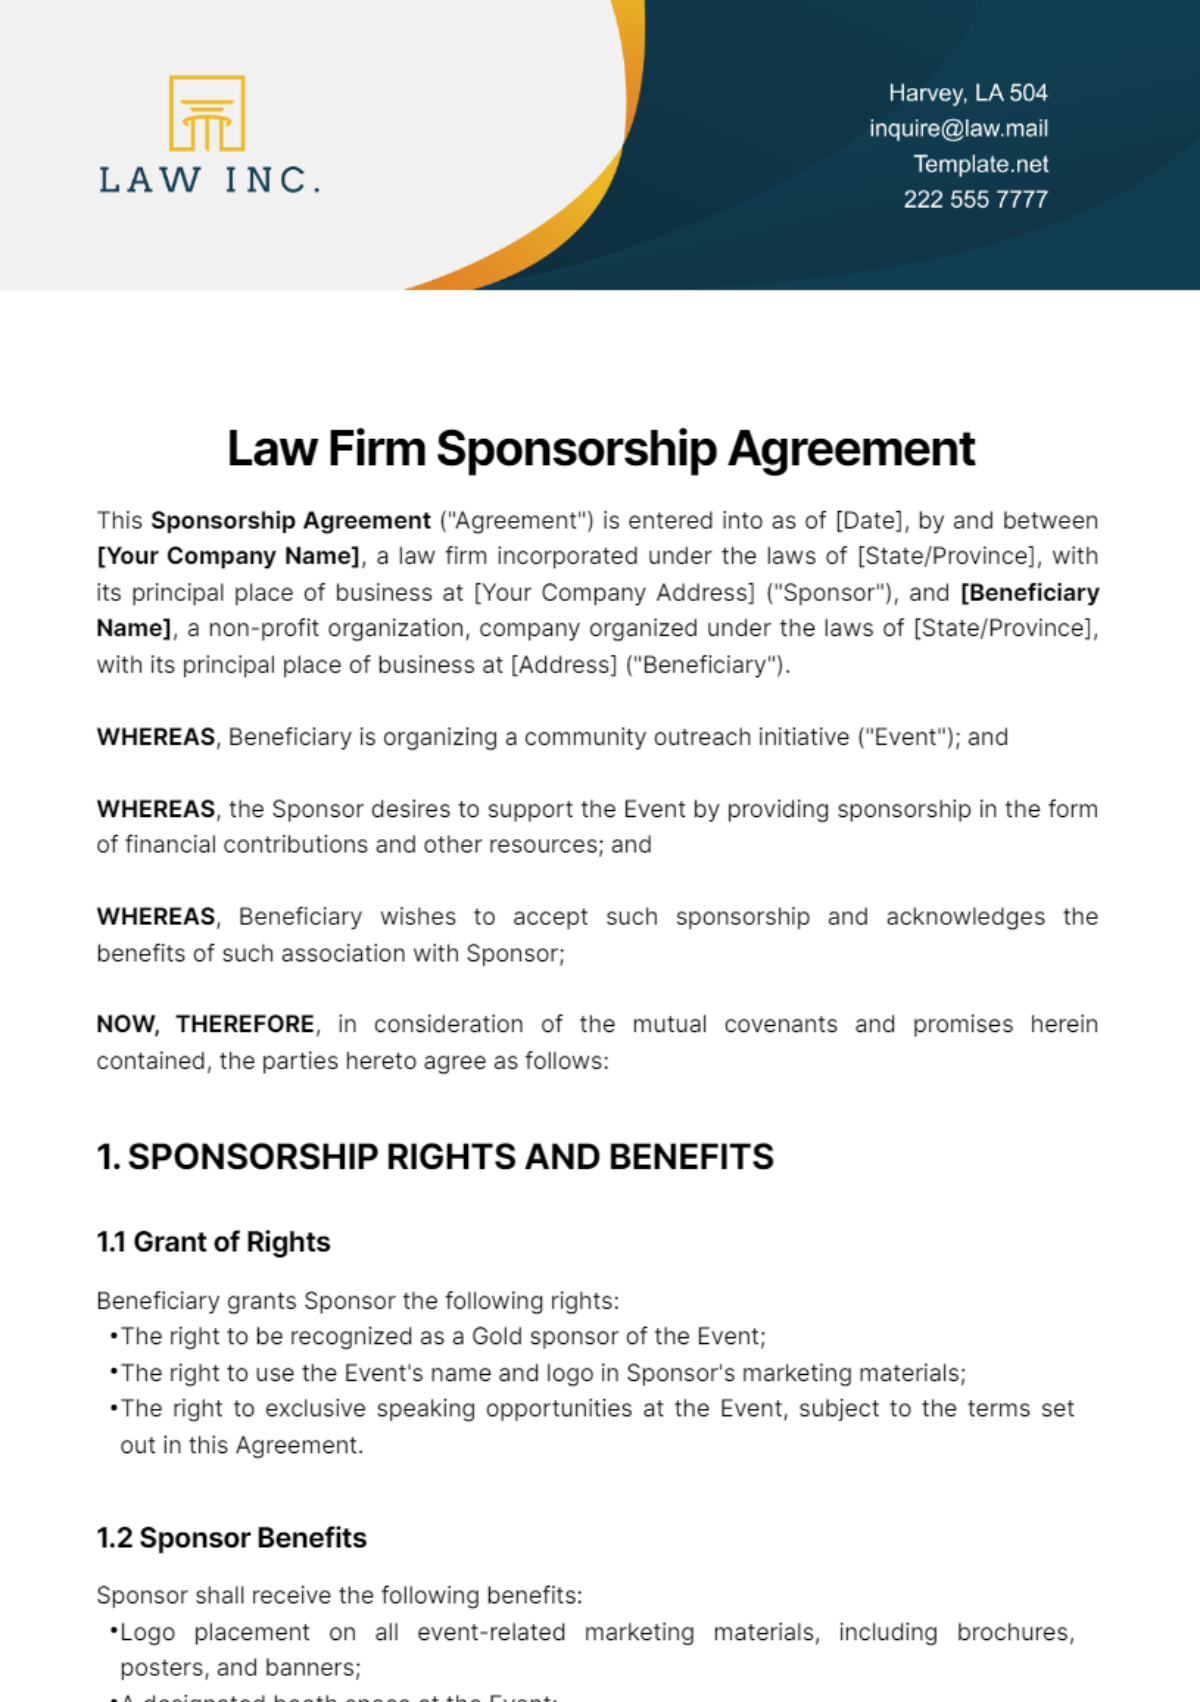 Free Law Firm Sponsorship Agreement Template